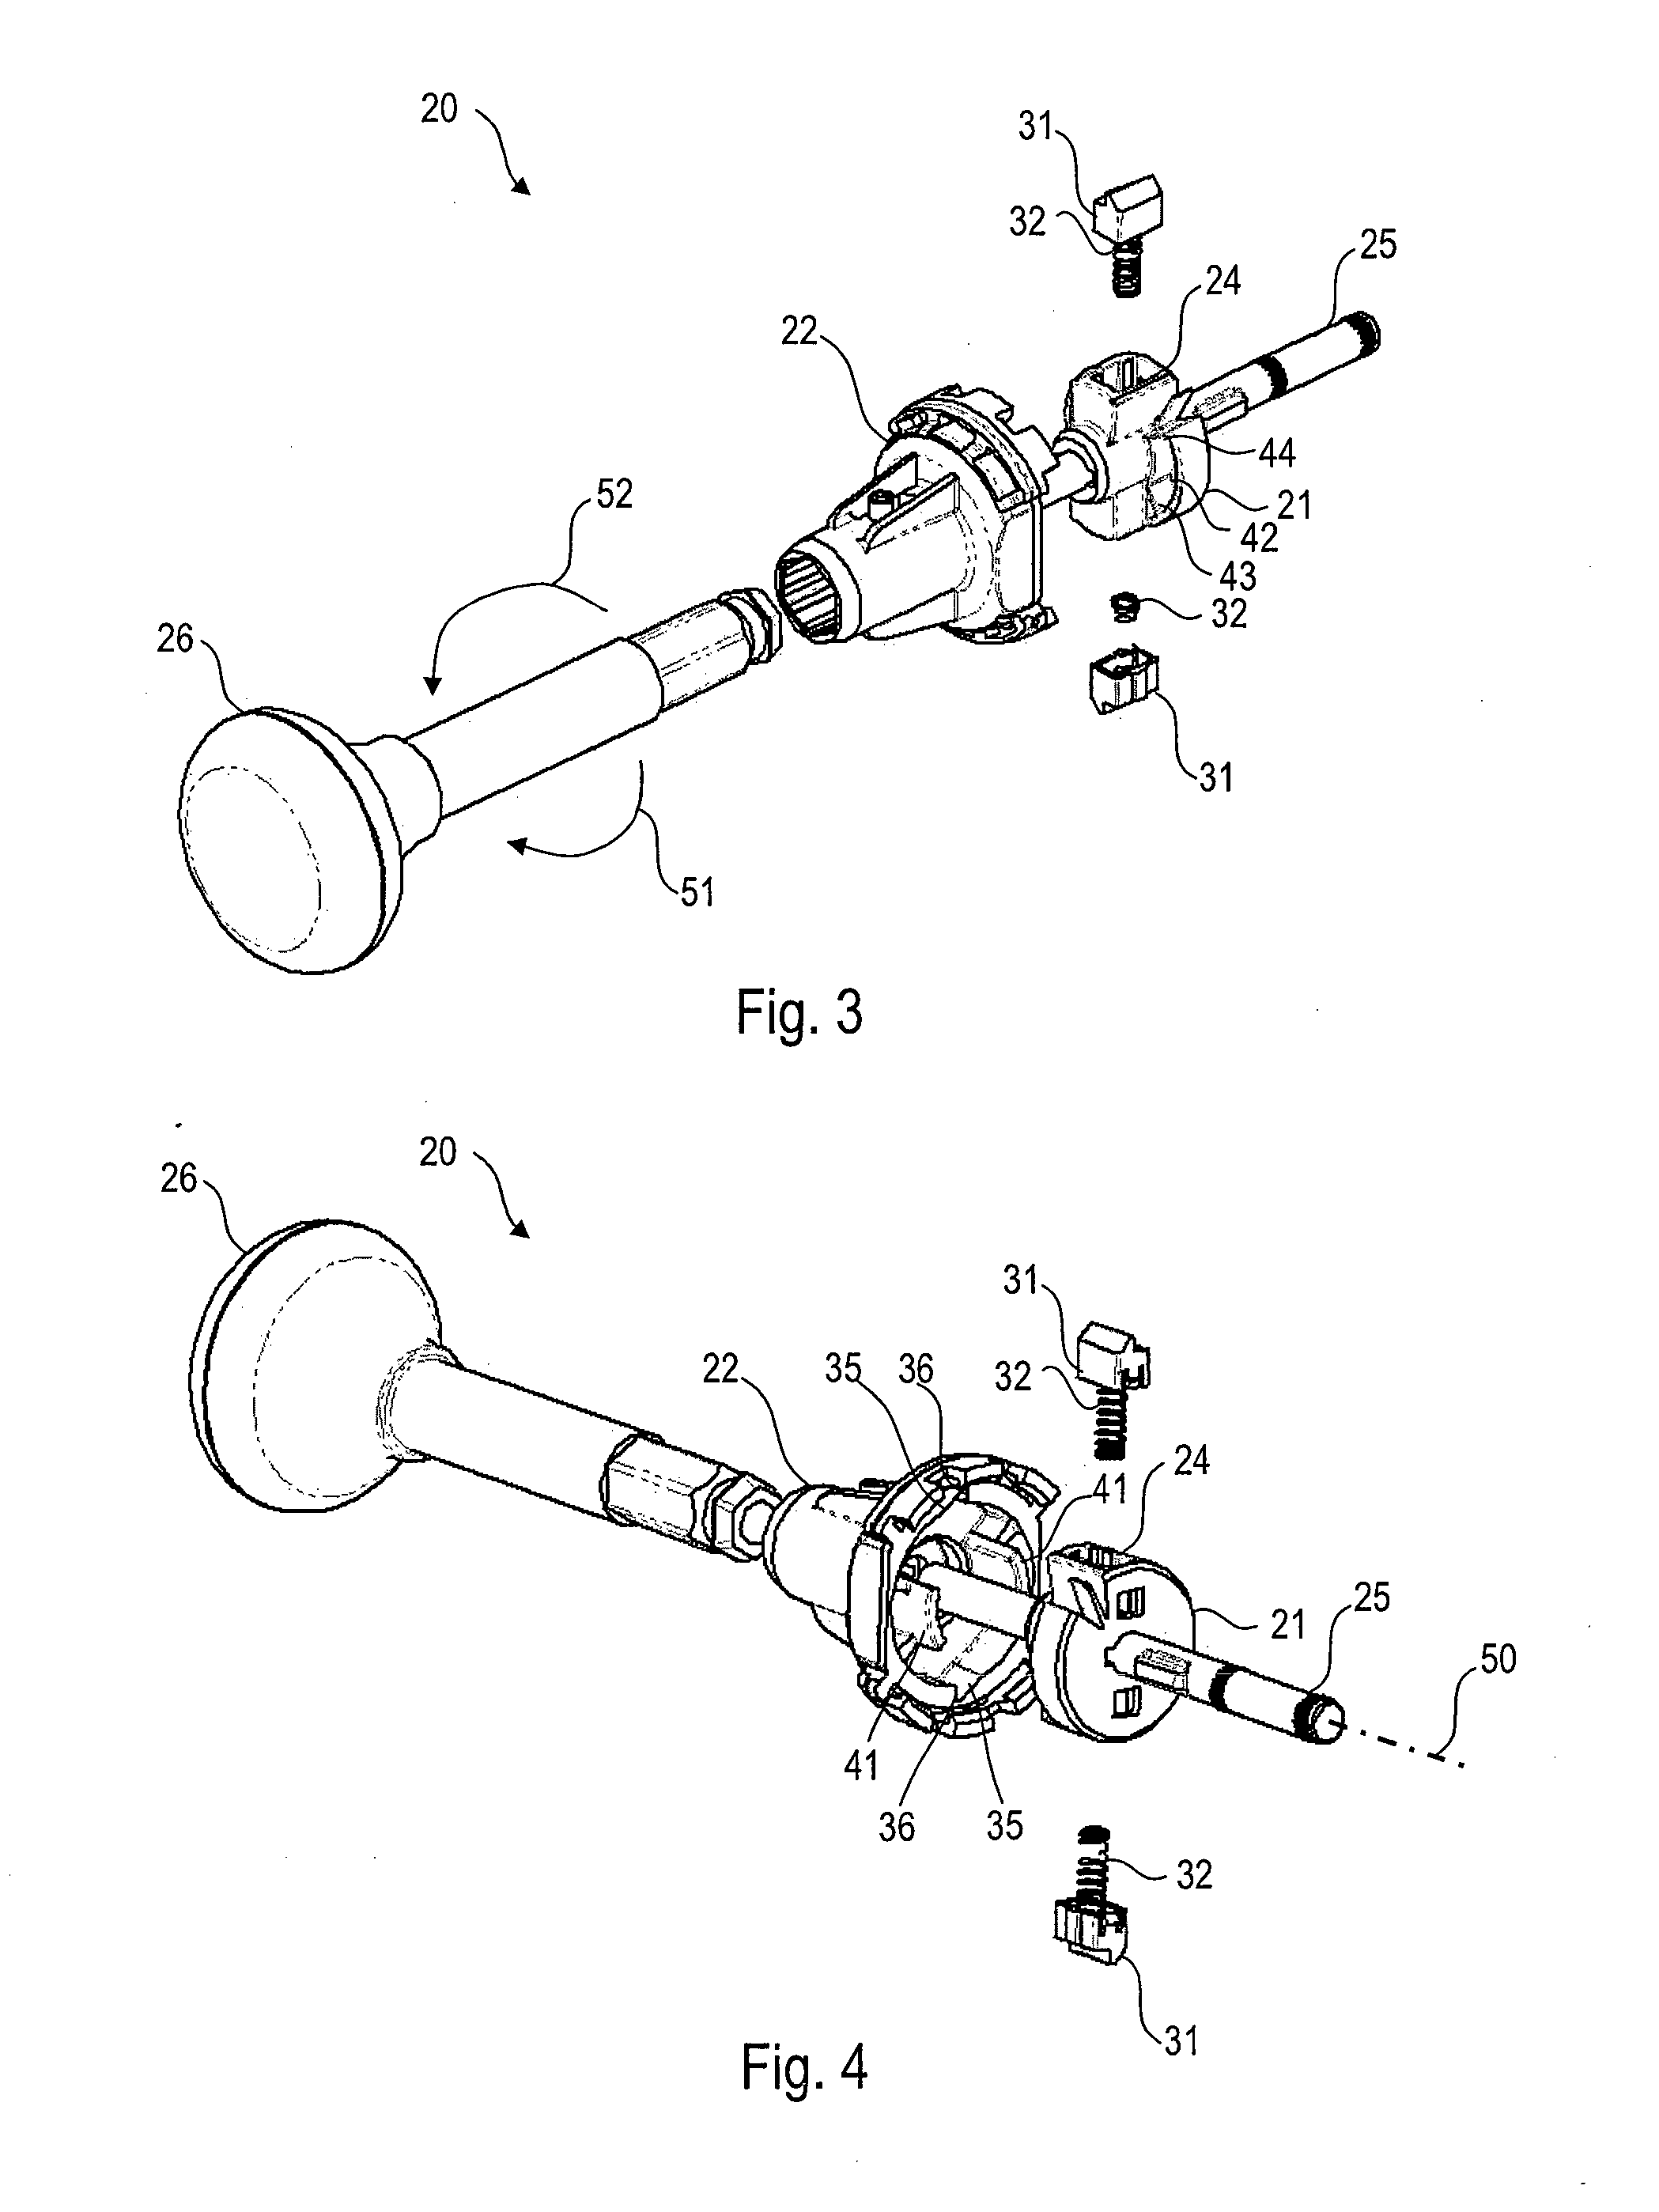 Tension adjust device for a chair and chair